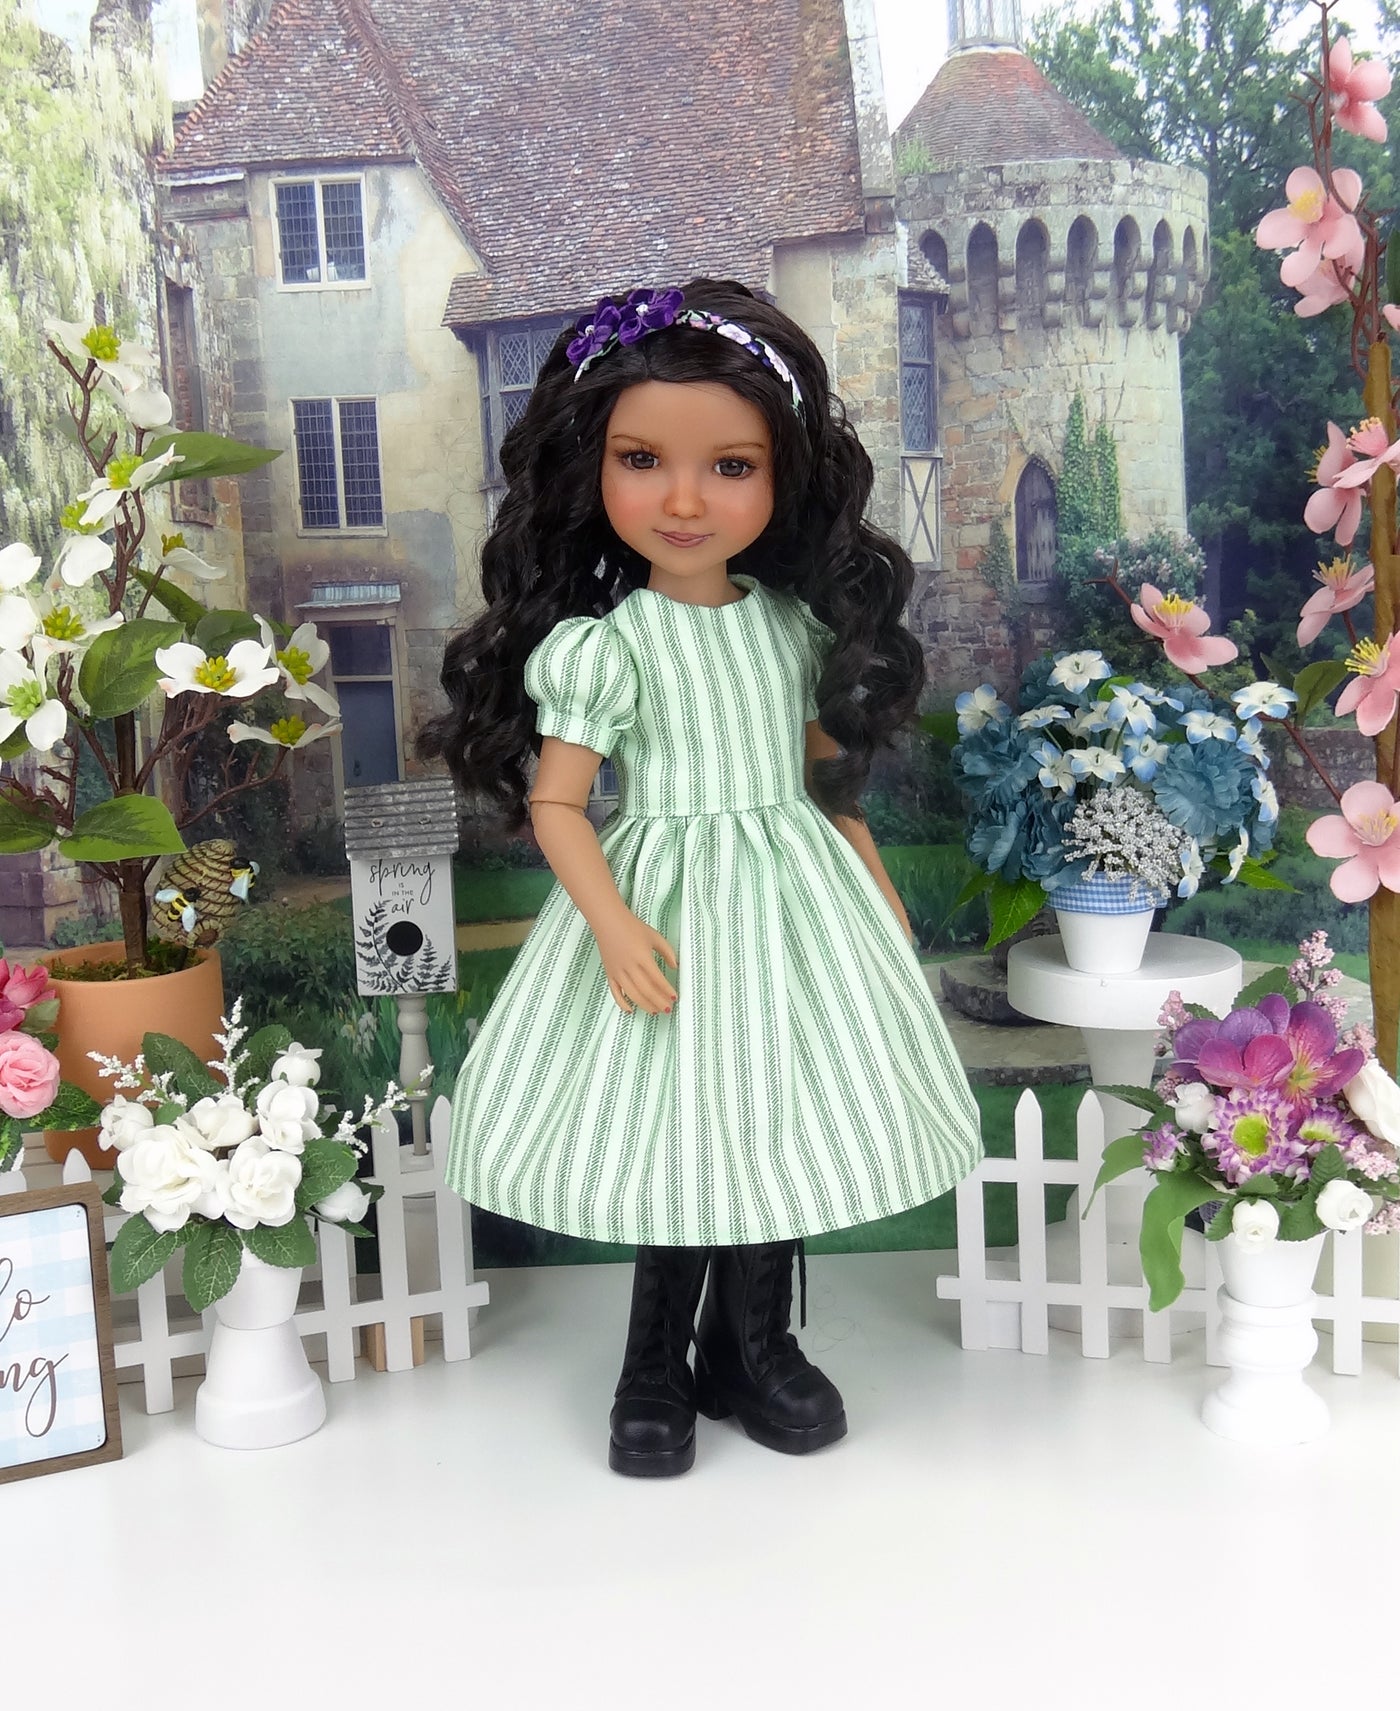 Garden Beauty - dress & pinafore with shoes for Ruby Red Fashion Friends doll